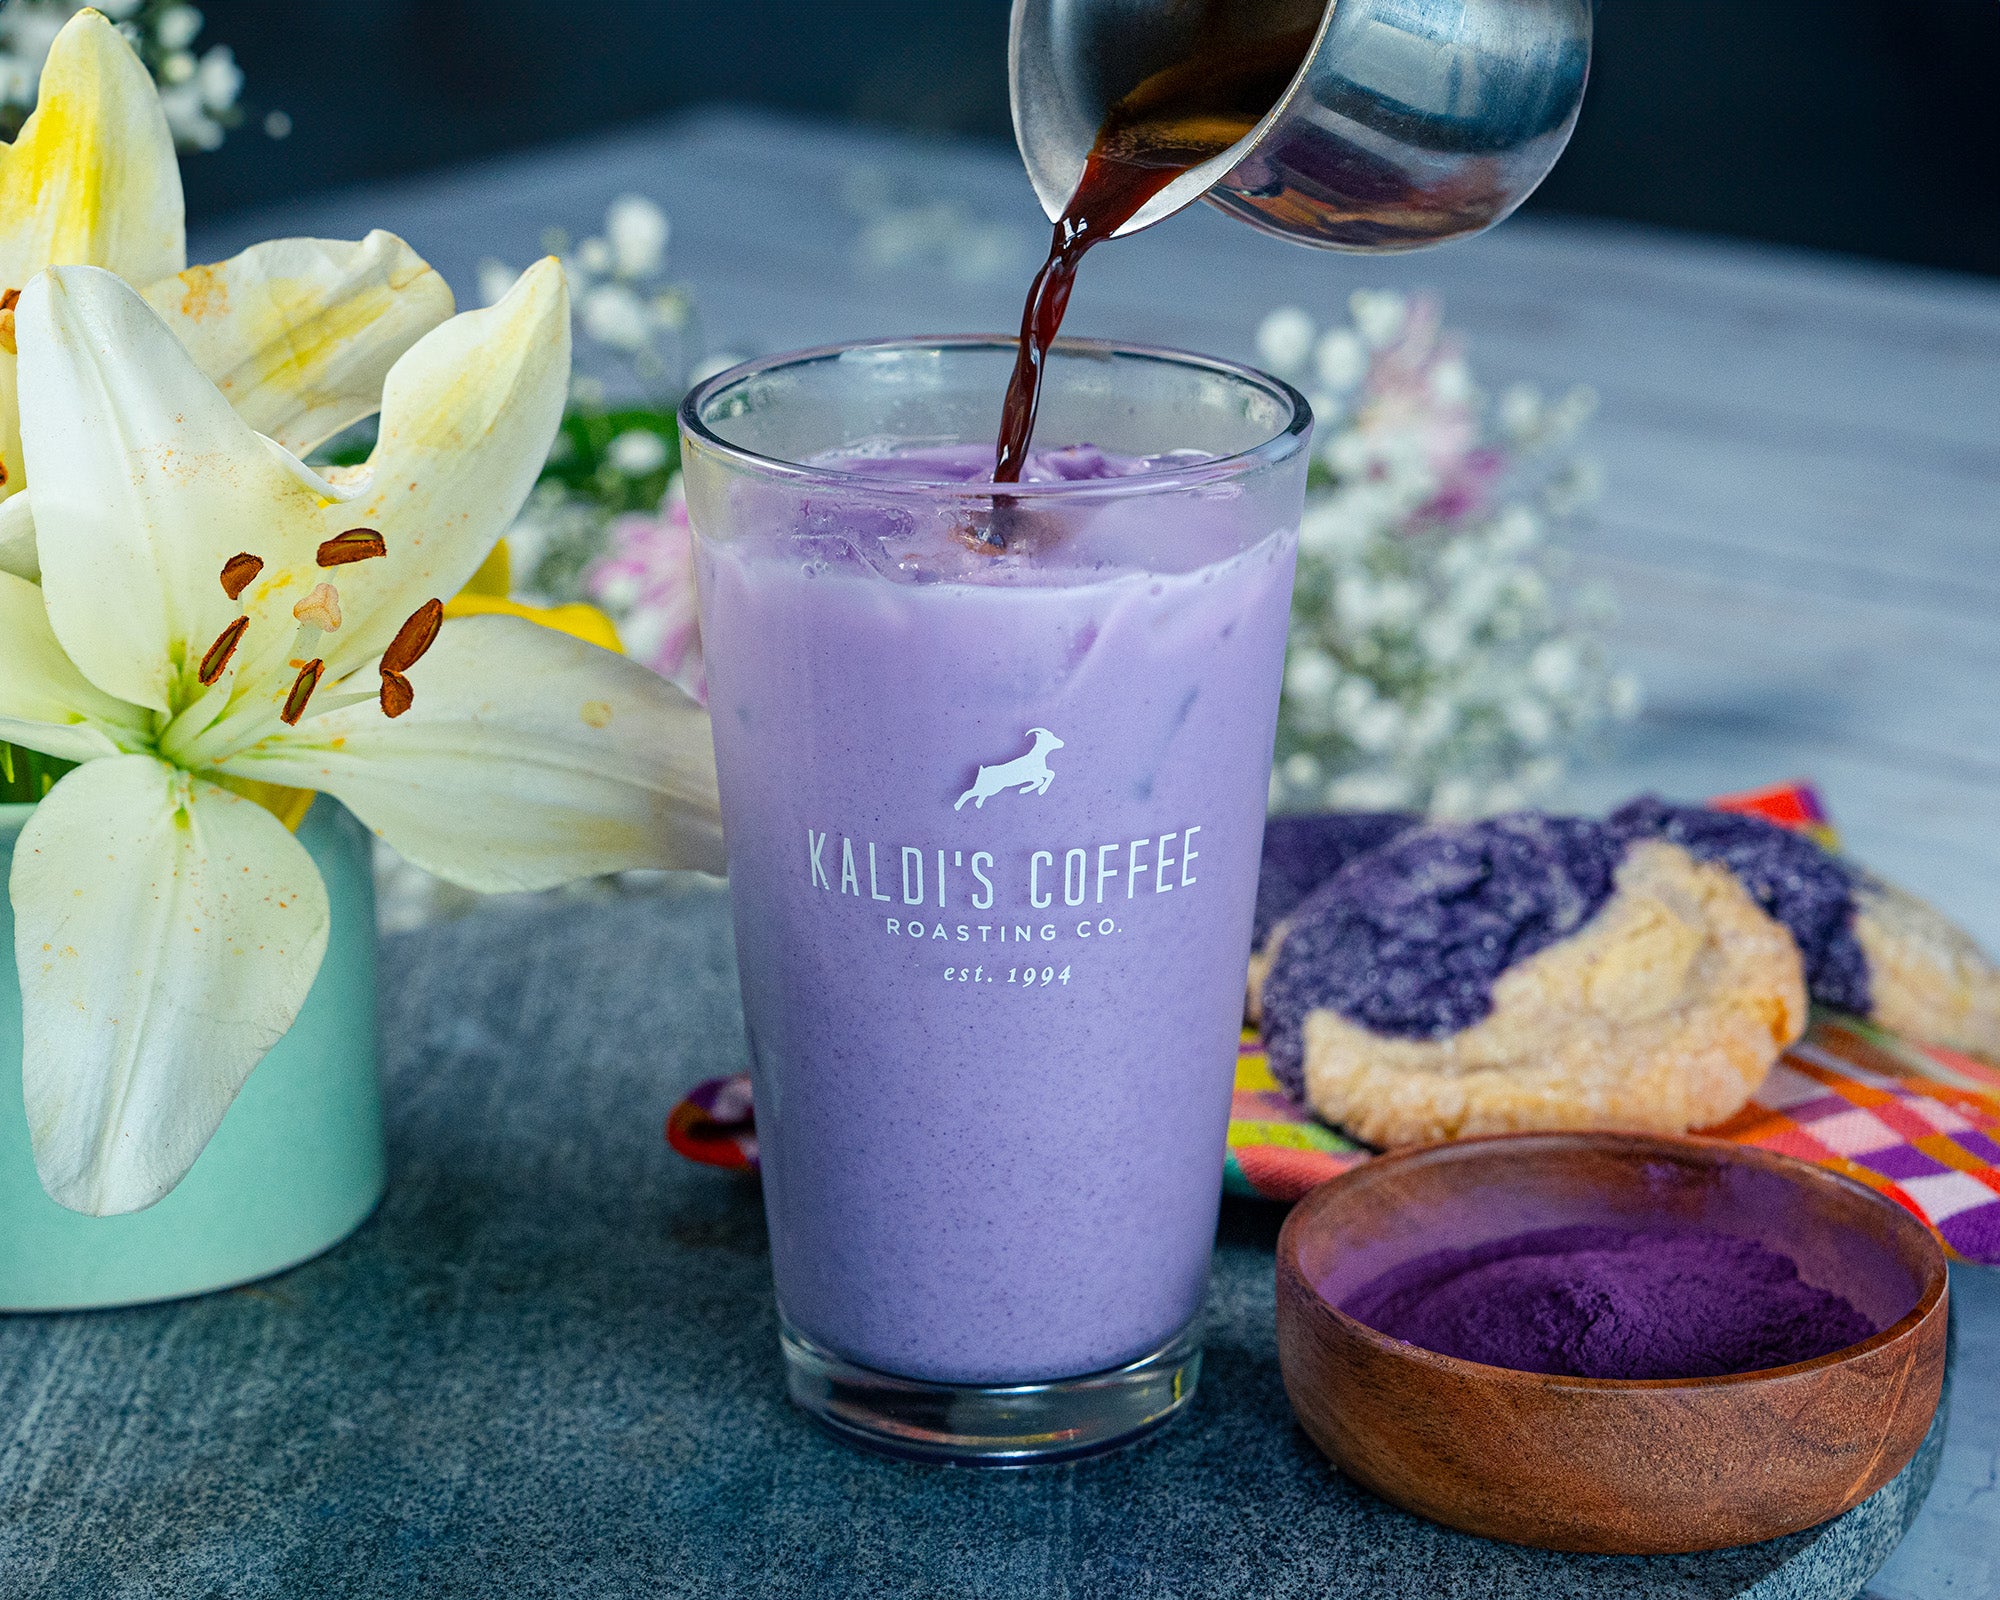 Espresso is poured into a tall glass filled with milk, colored purple by ube syrup